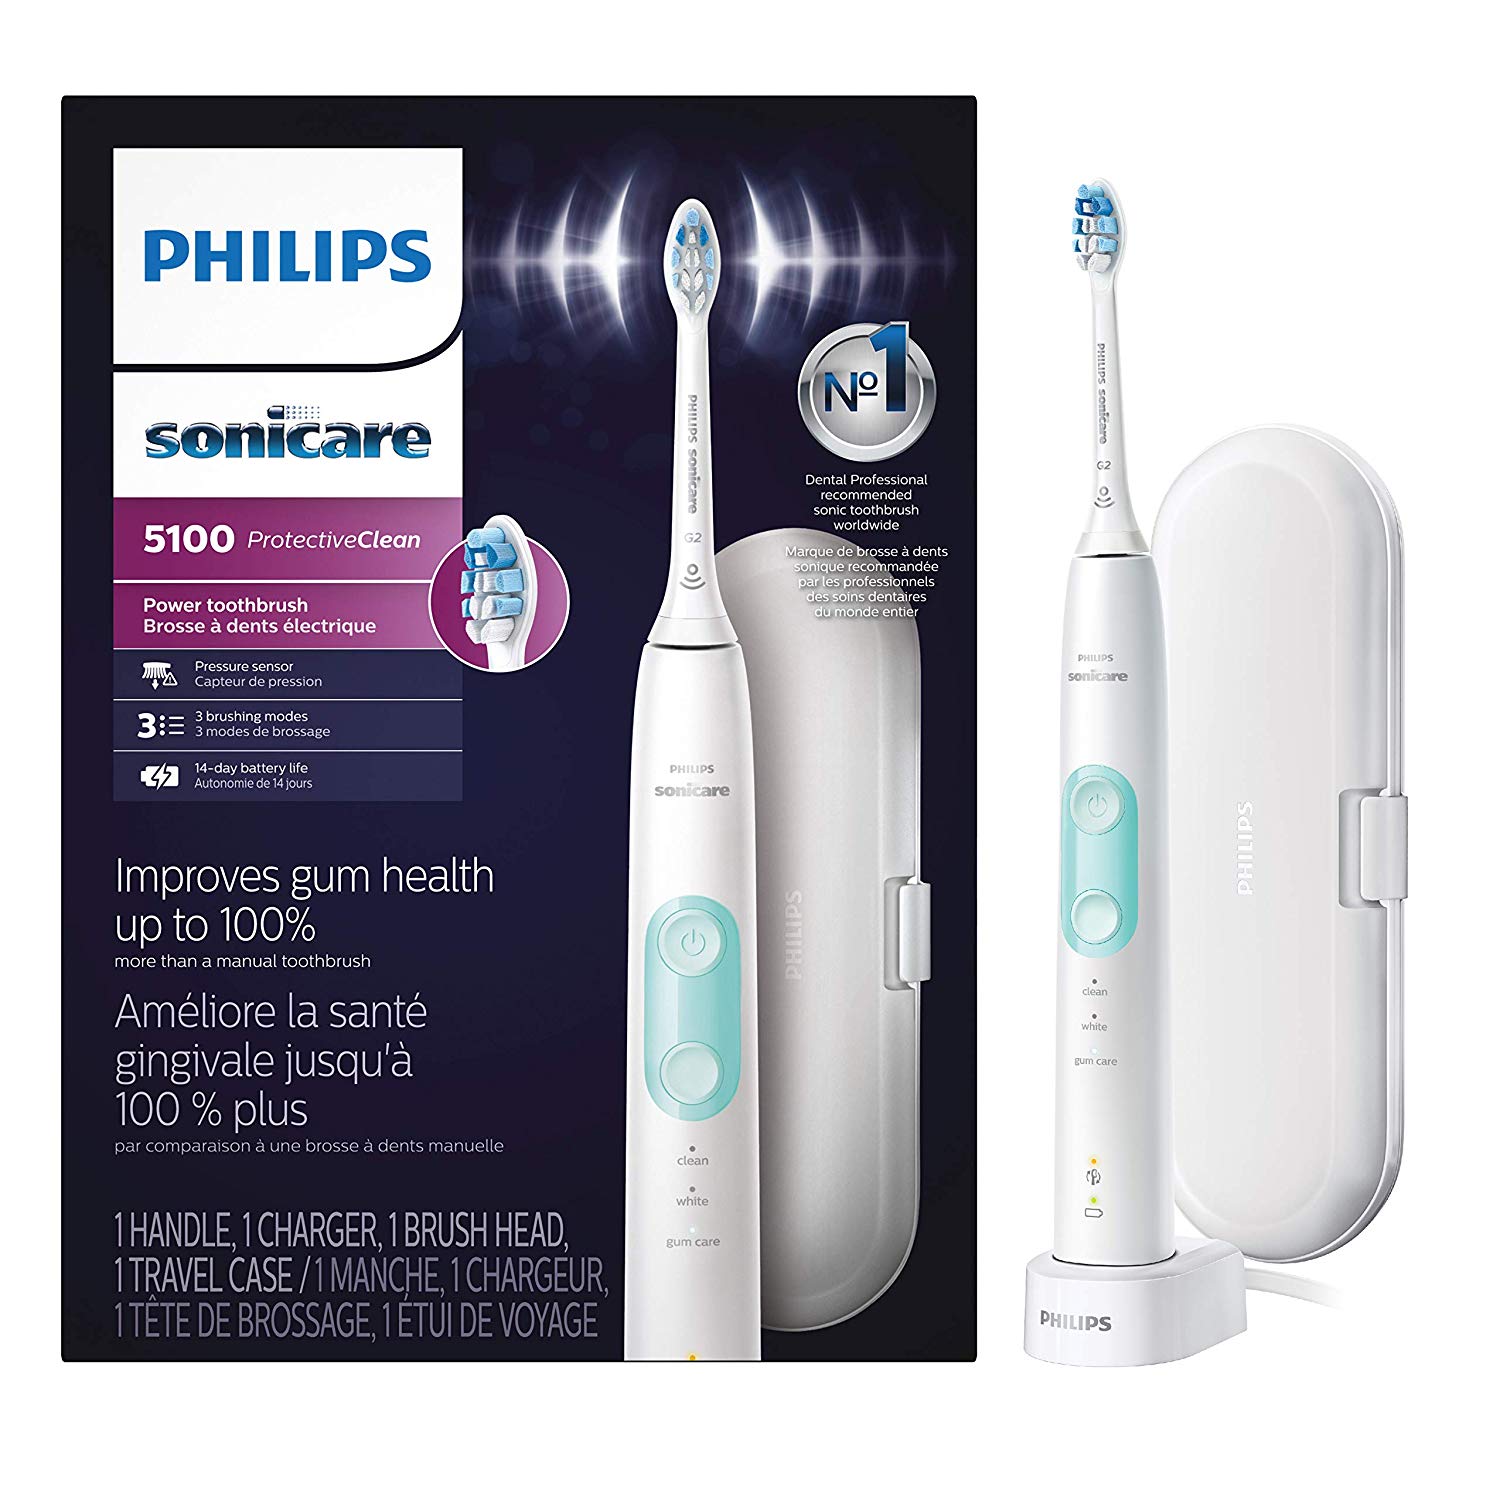 Review of Philips Sonicare ProtectiveClean 5100 Rechargeable Electric Toothbrush, White HX6857/11